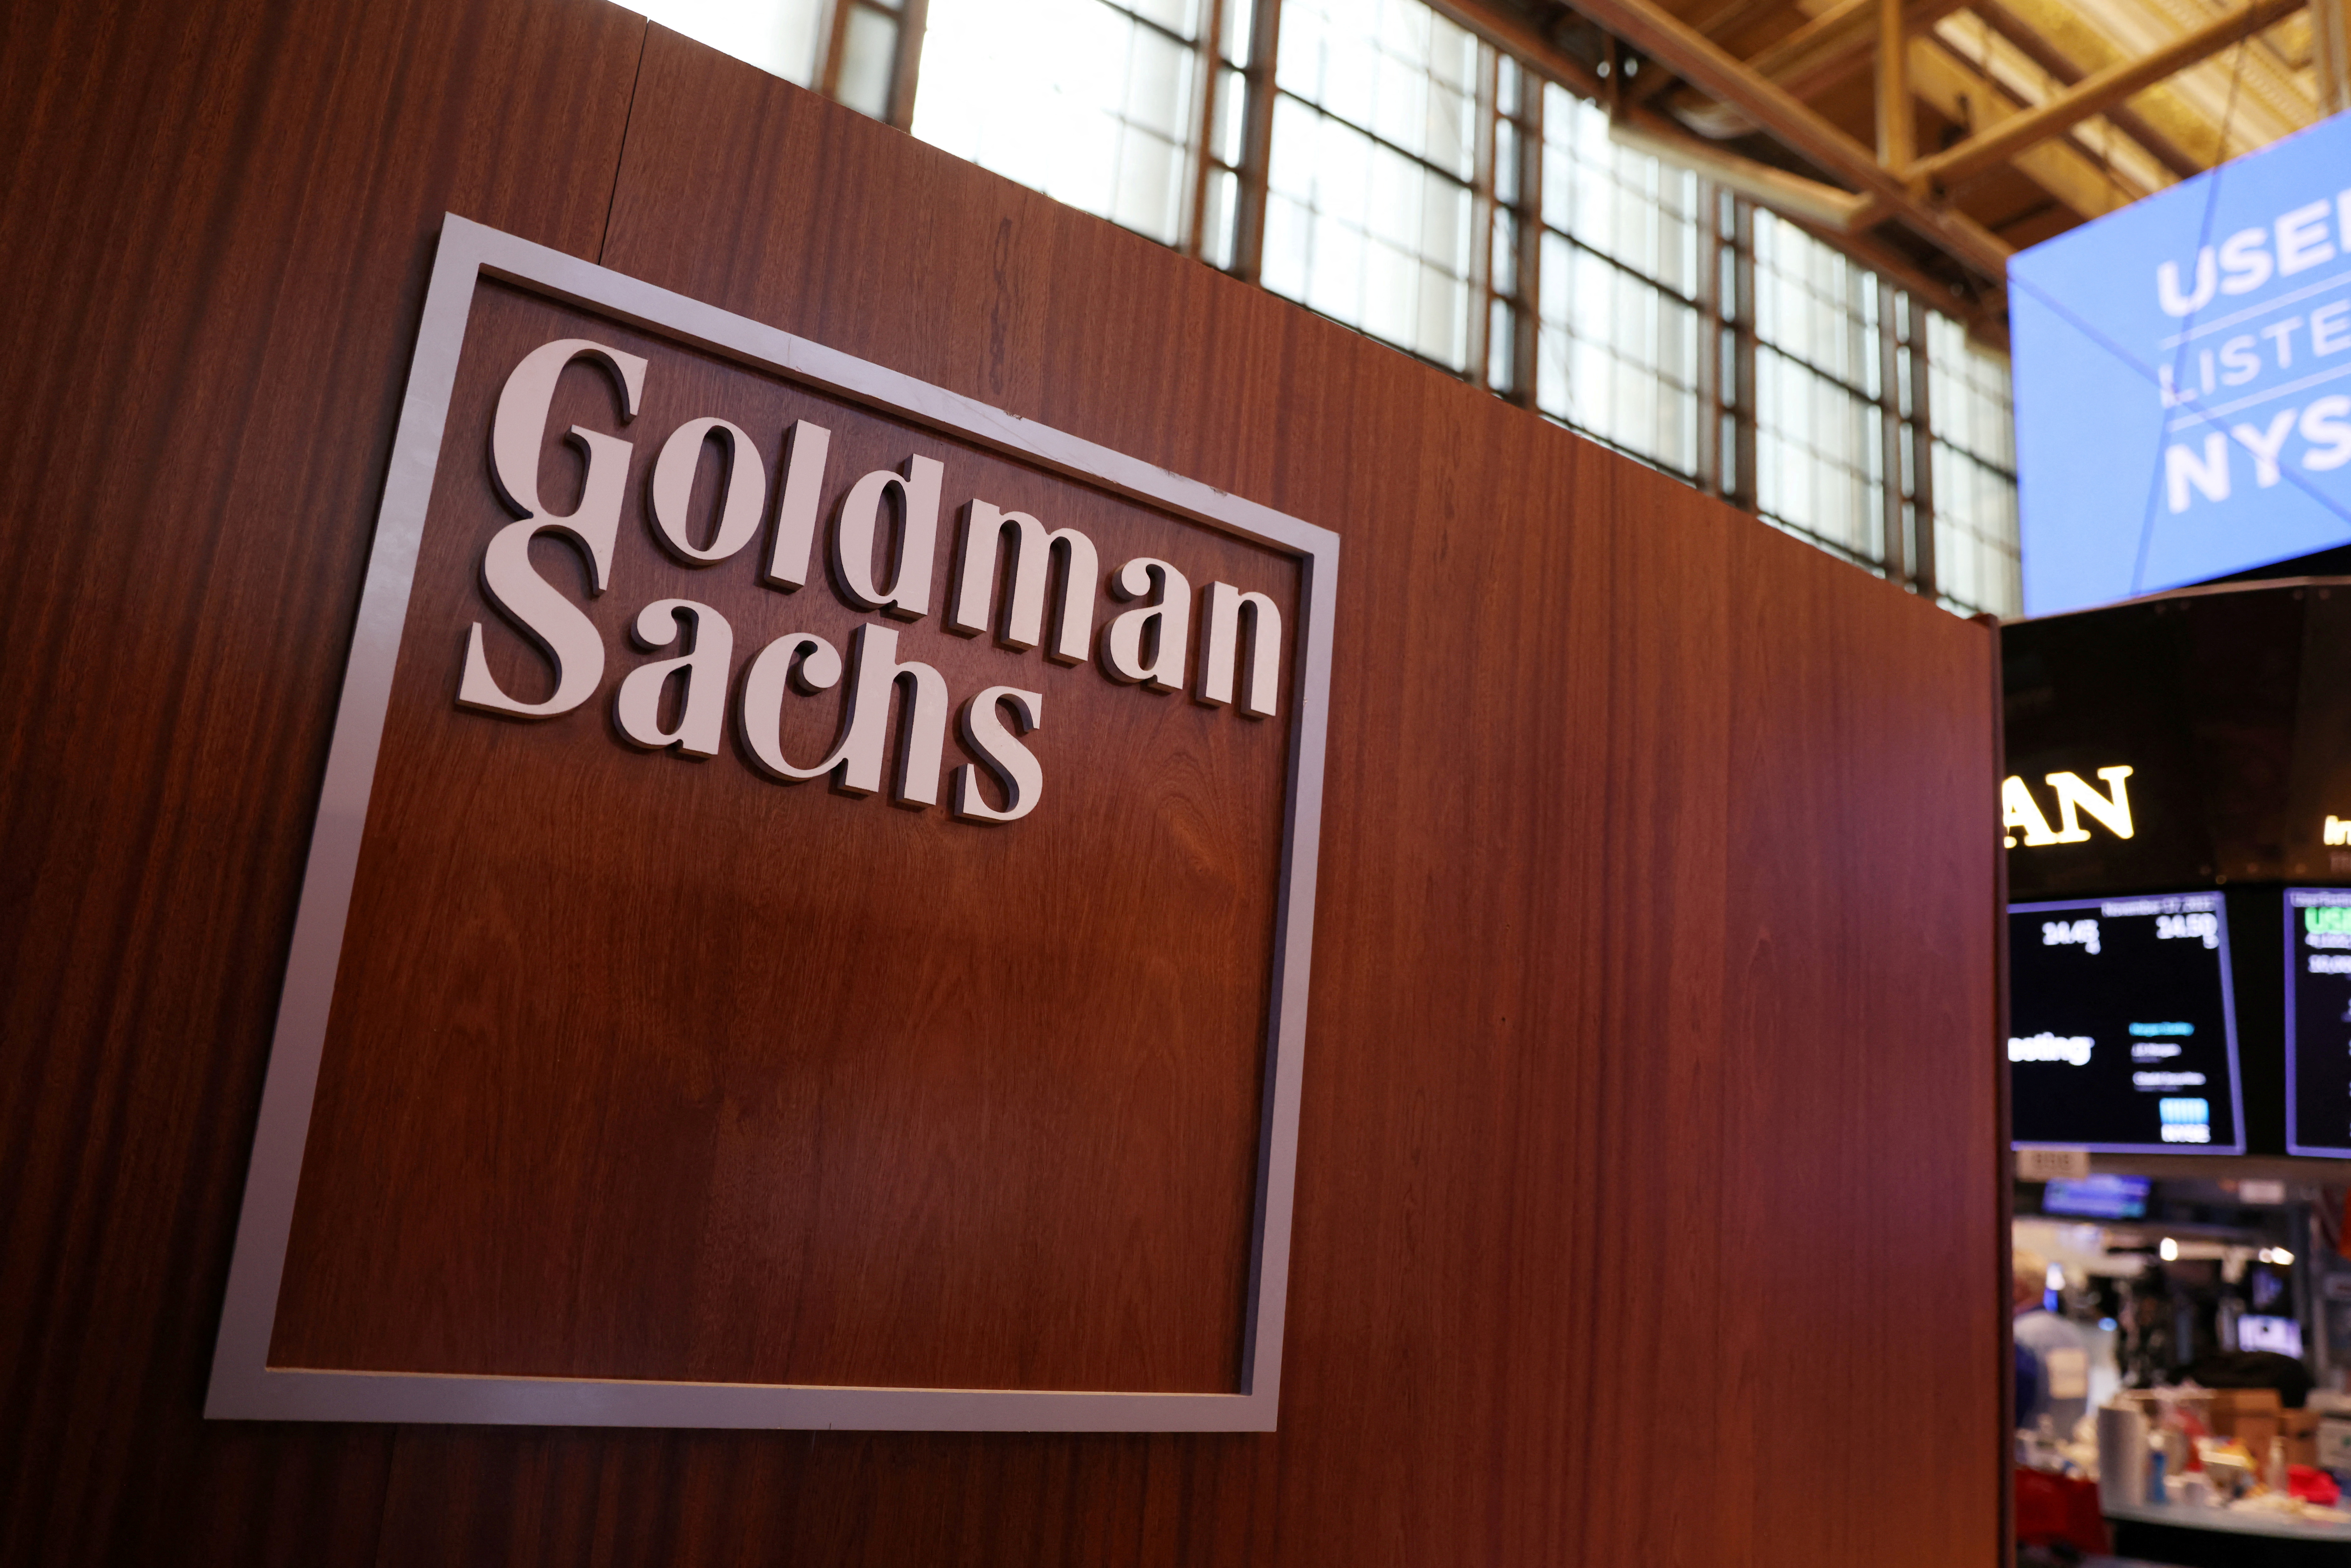  Goldman Sachs and JP Morgan to exit Russia